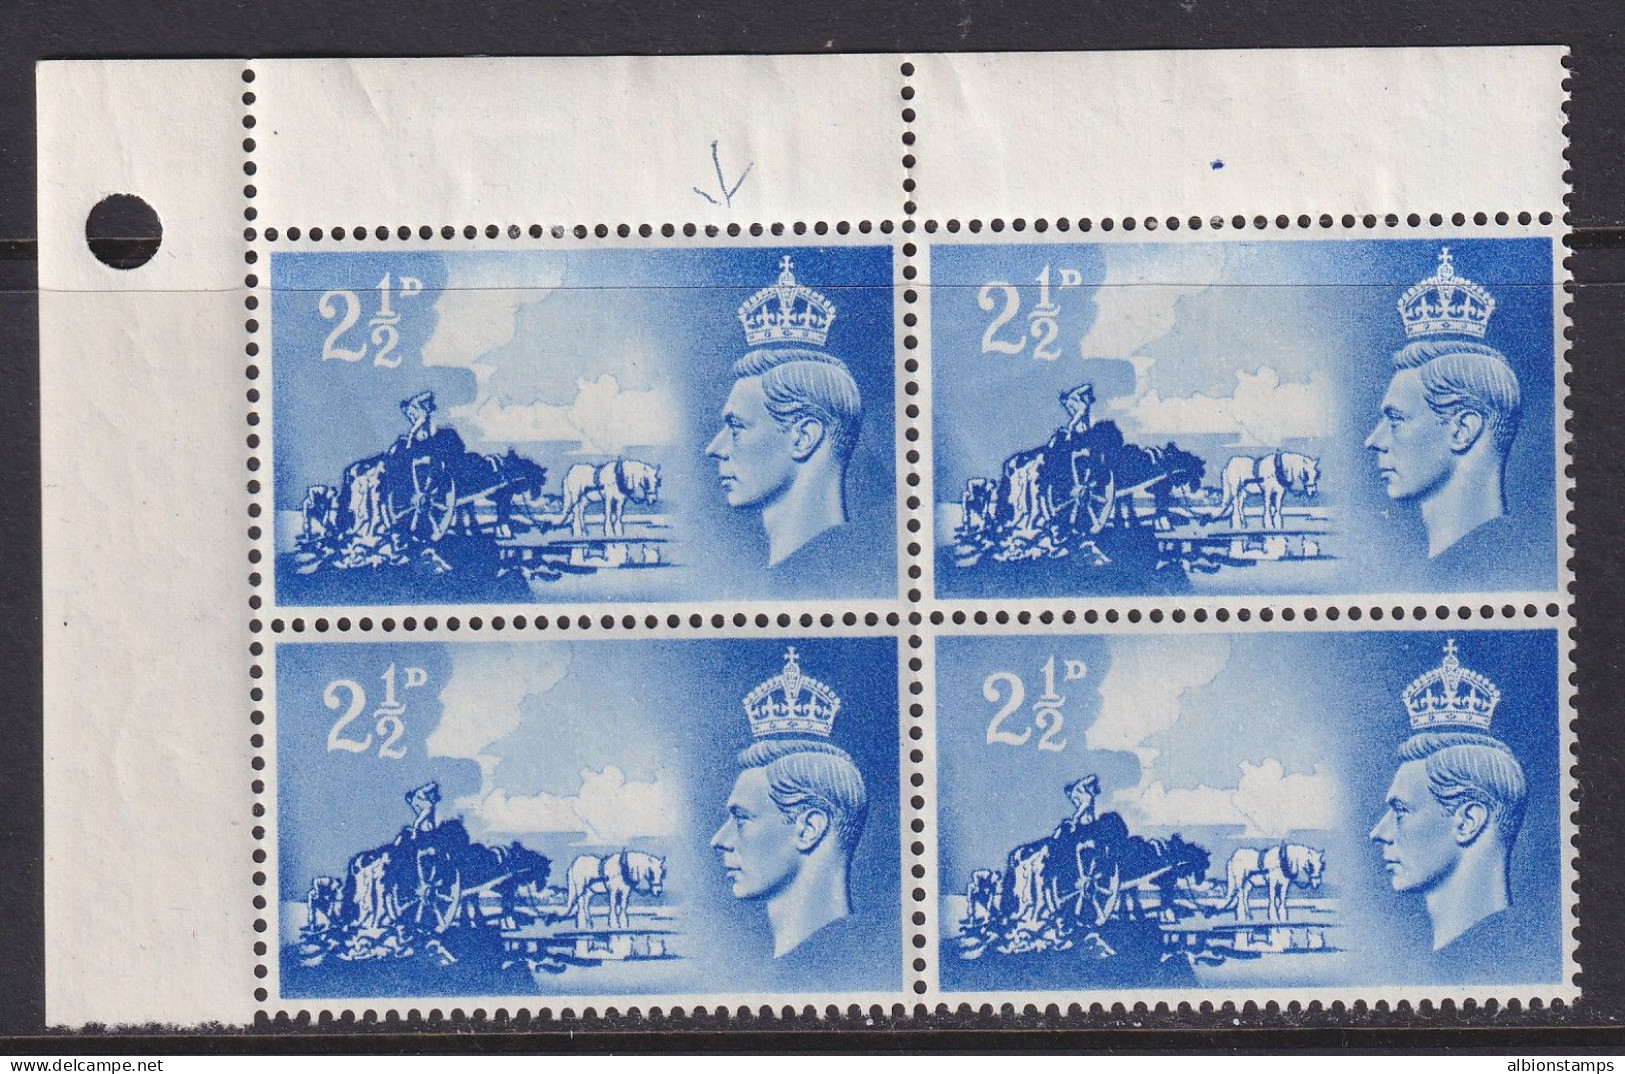 Channel Islands, Great Britain, CW CIS2b, MLH Block "Crown Flaw" Variety - Unused Stamps